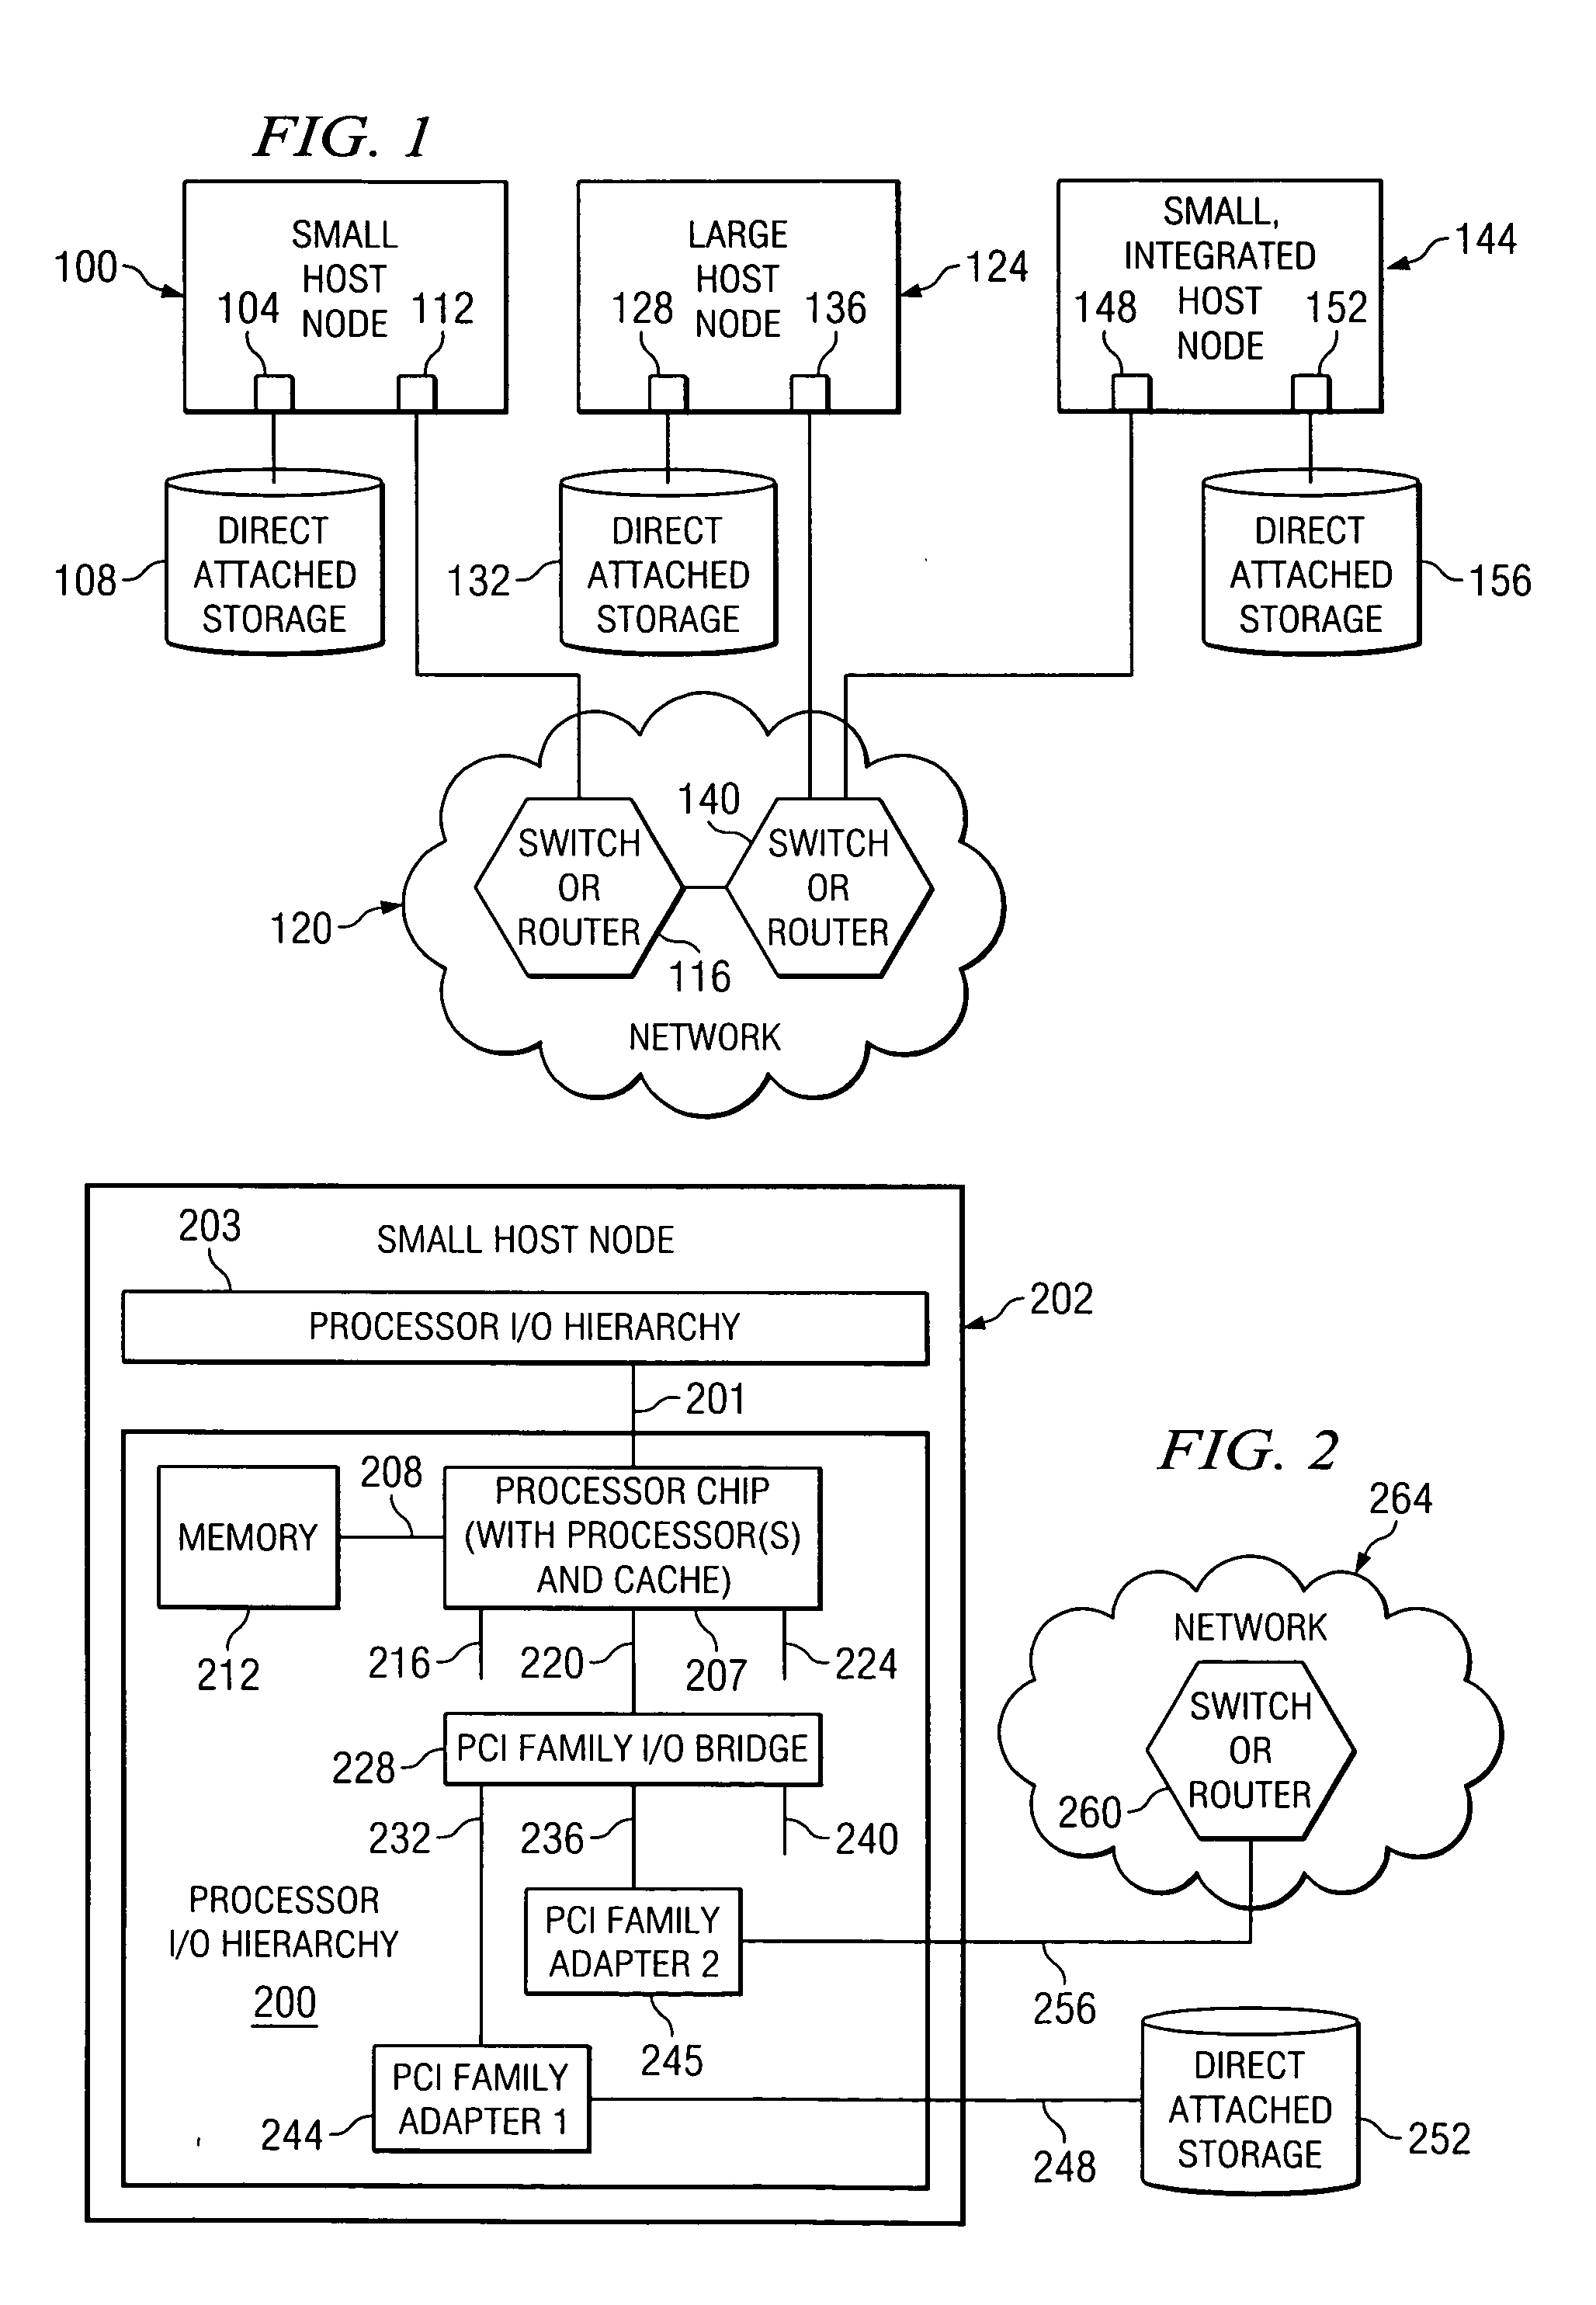 Method and system for native virtualization on a partially trusted adapter using adapter bus, device and function number for identification